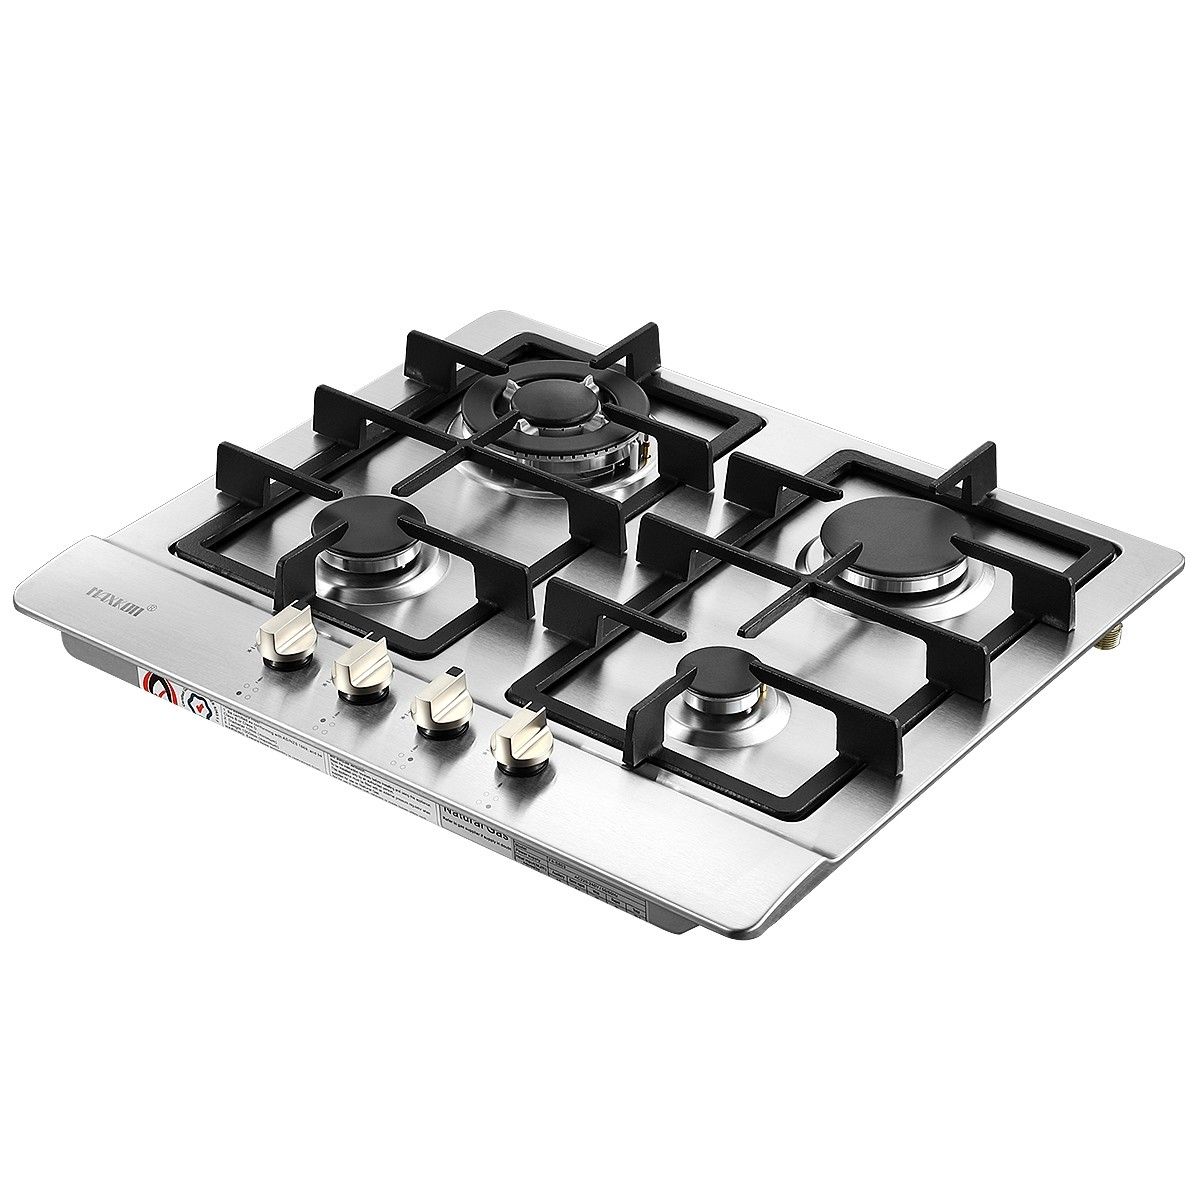 4 Burner Gas Cooktop Hob Stainless Steel Kitchen Gas Stove NG LPG